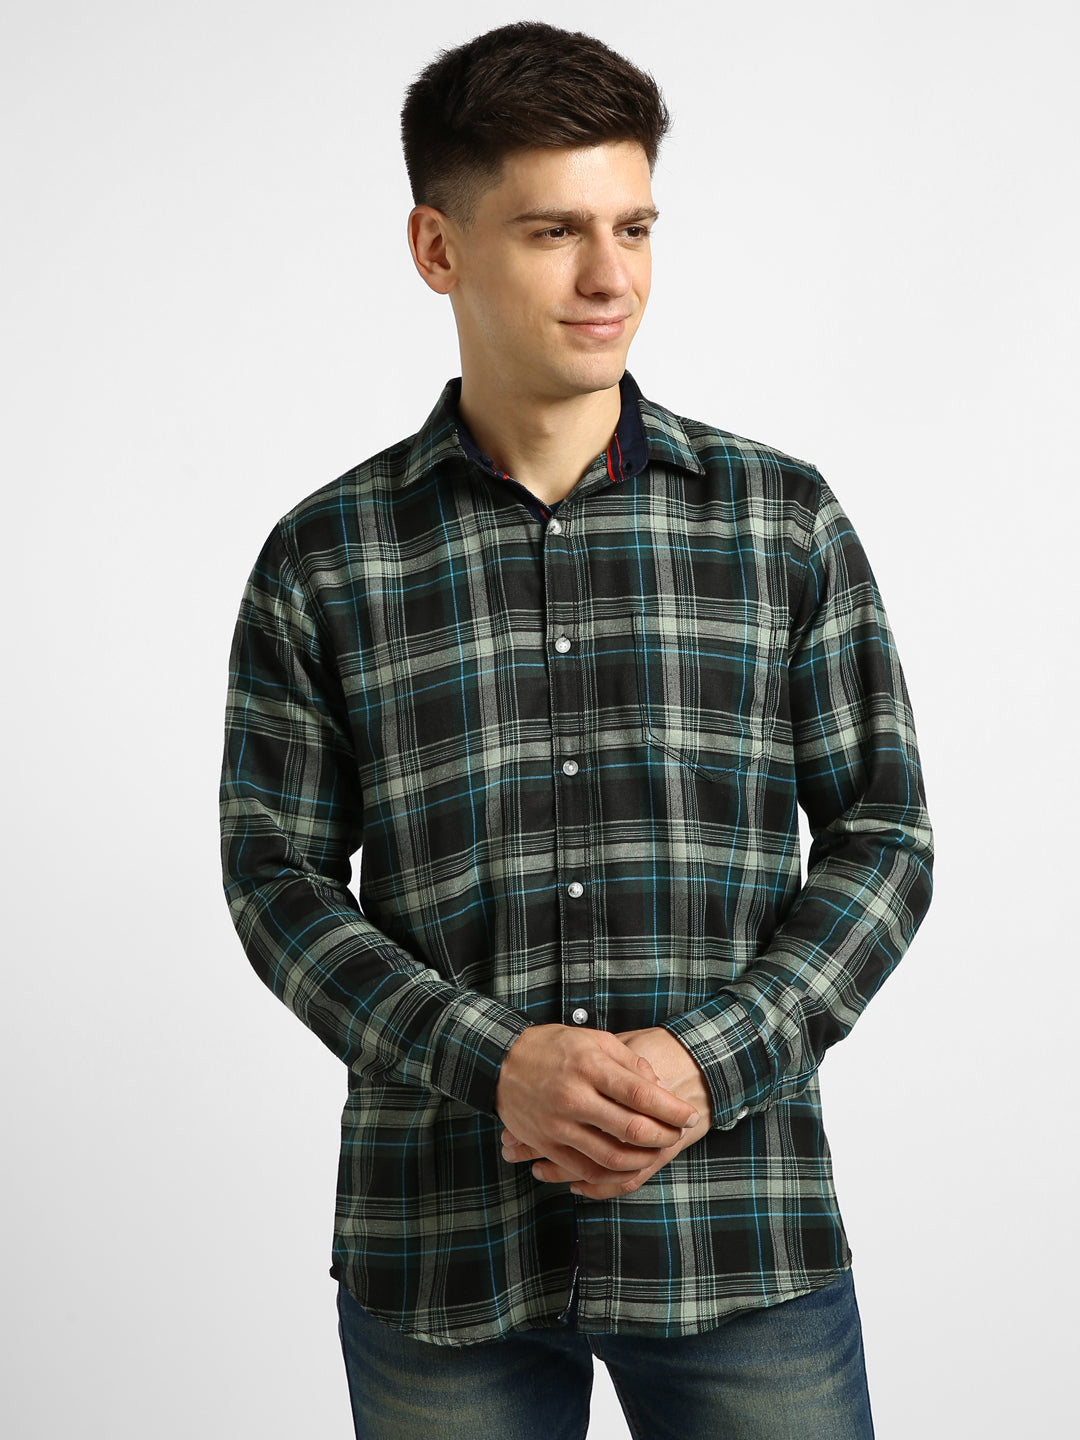 Men's Green Cotton Full Sleeve Slim Fit Casual Checkered Shirtwith Hooded Collar